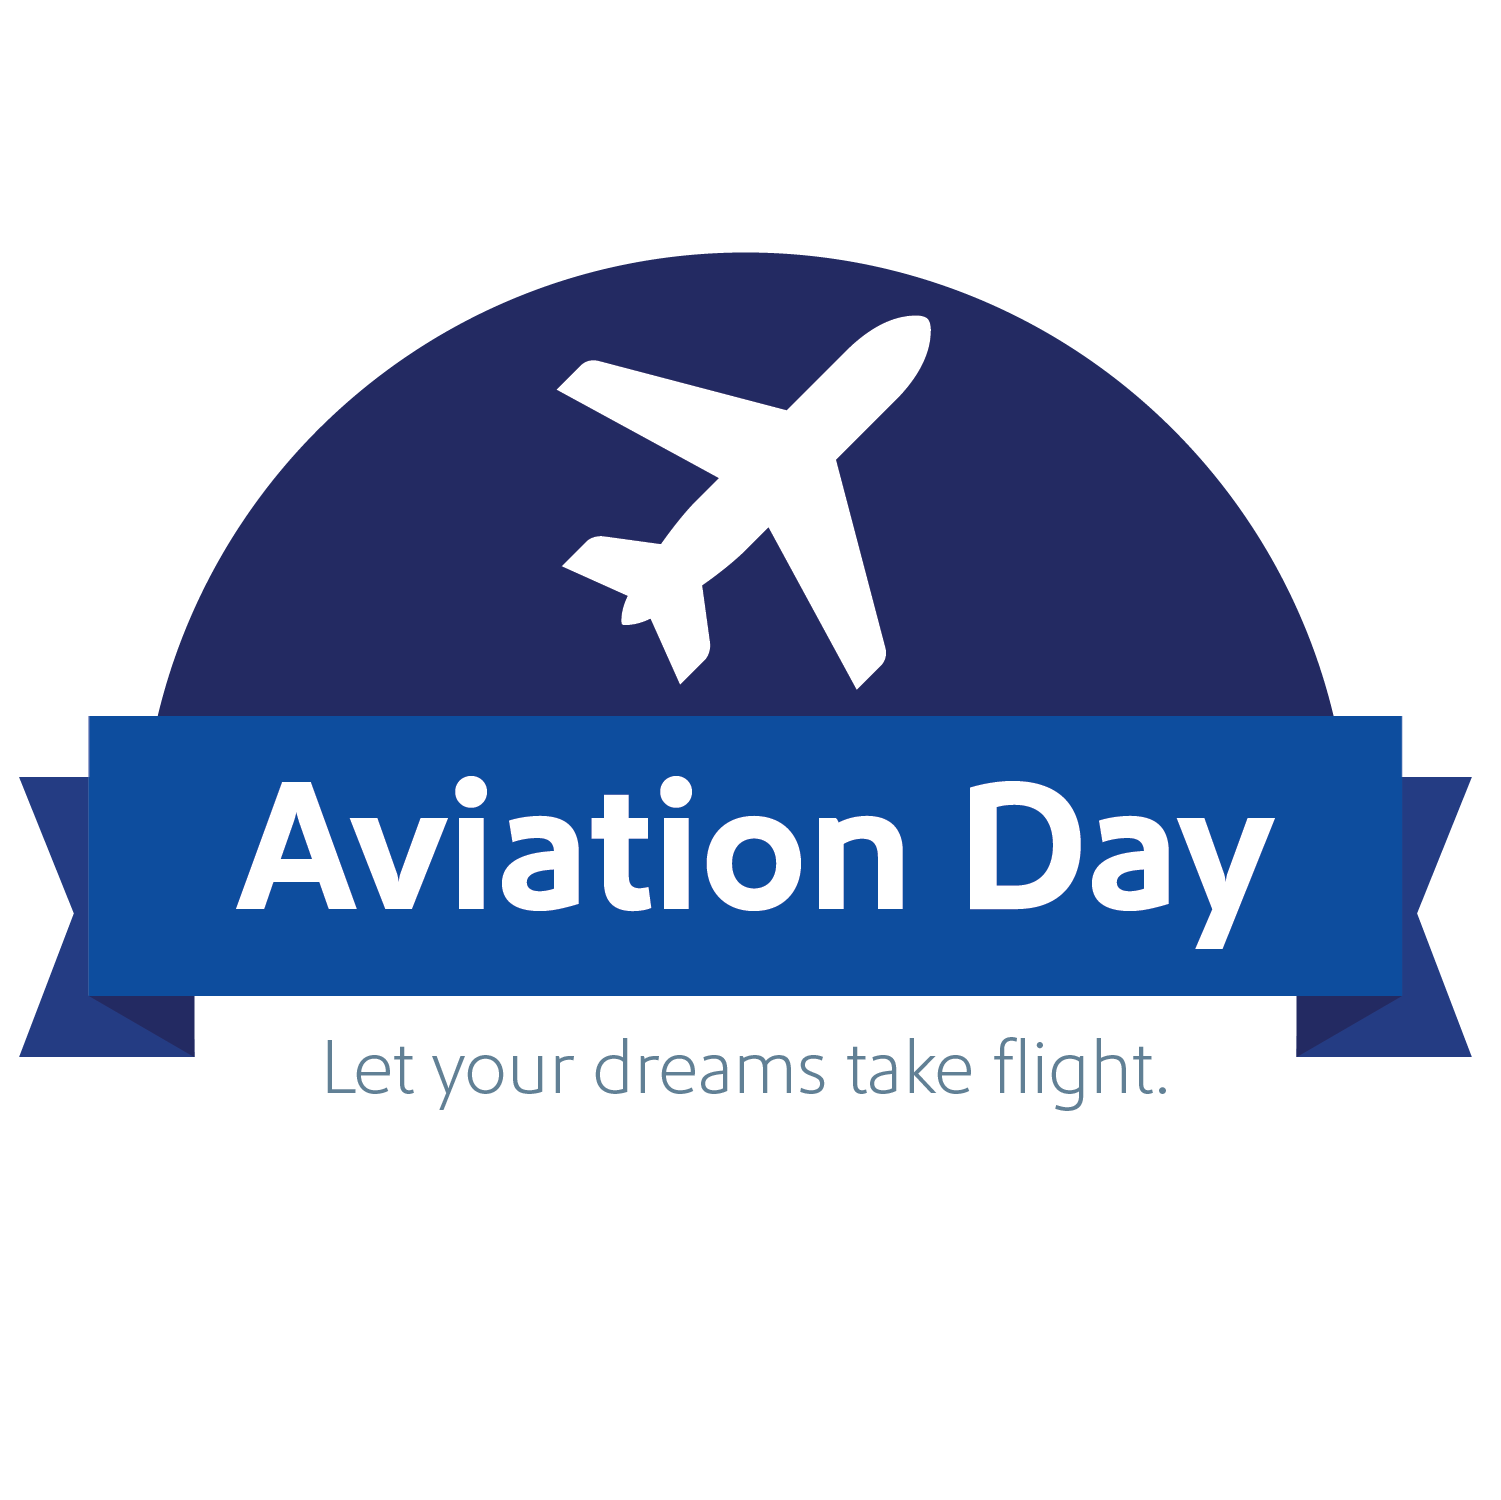 Aviation Day brand mark with tagline 'let your dreams take flight